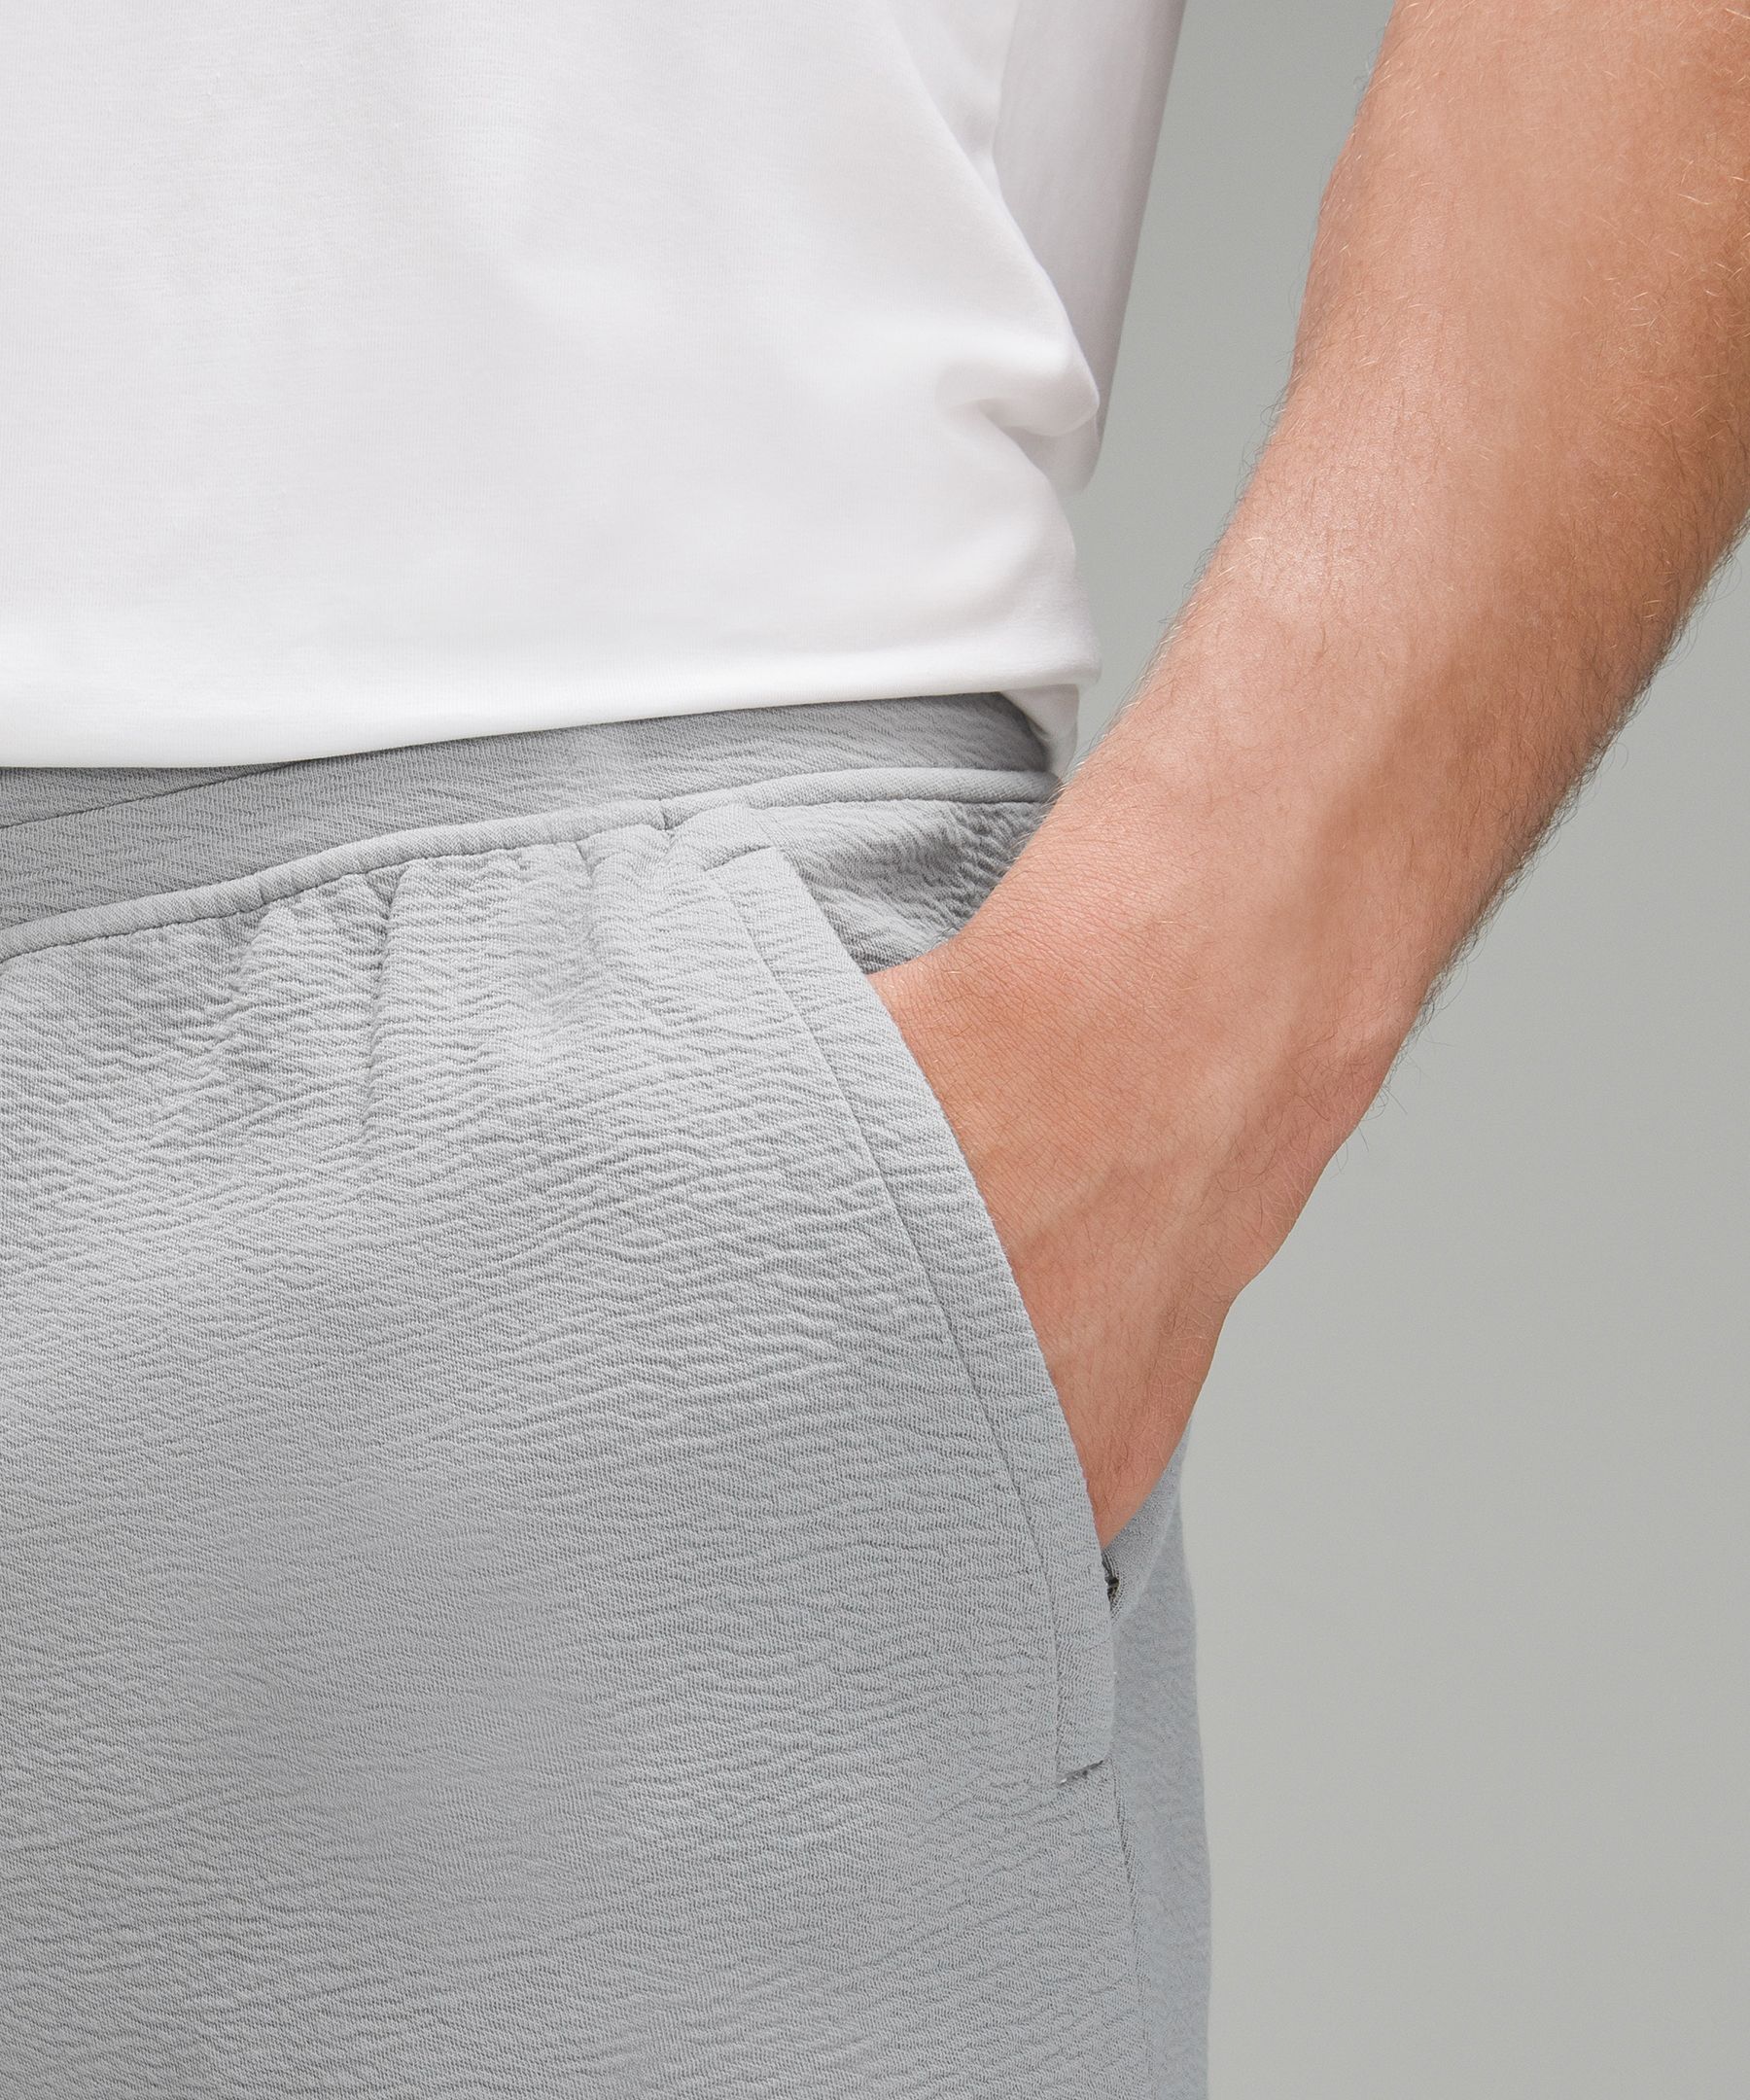 Shop Lululemon Textured Spacer Classic-tapered Pants